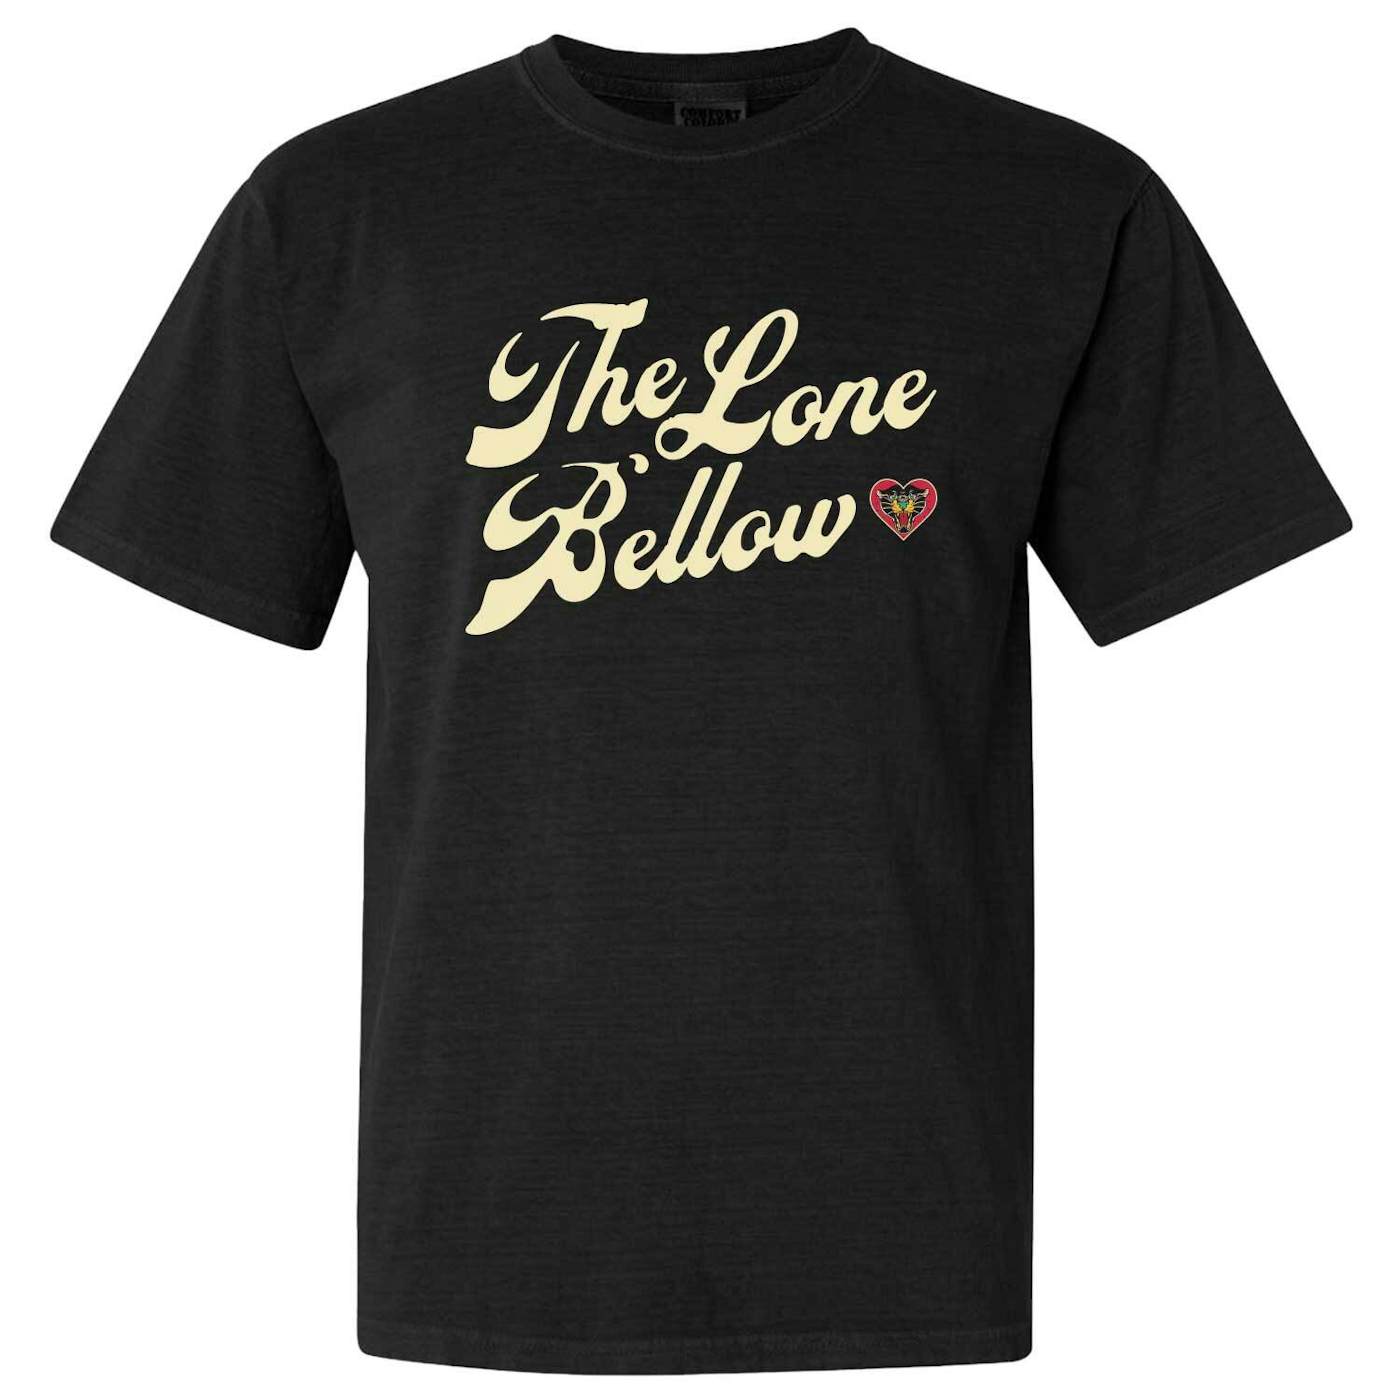 The Lone Bellow Panther Tee